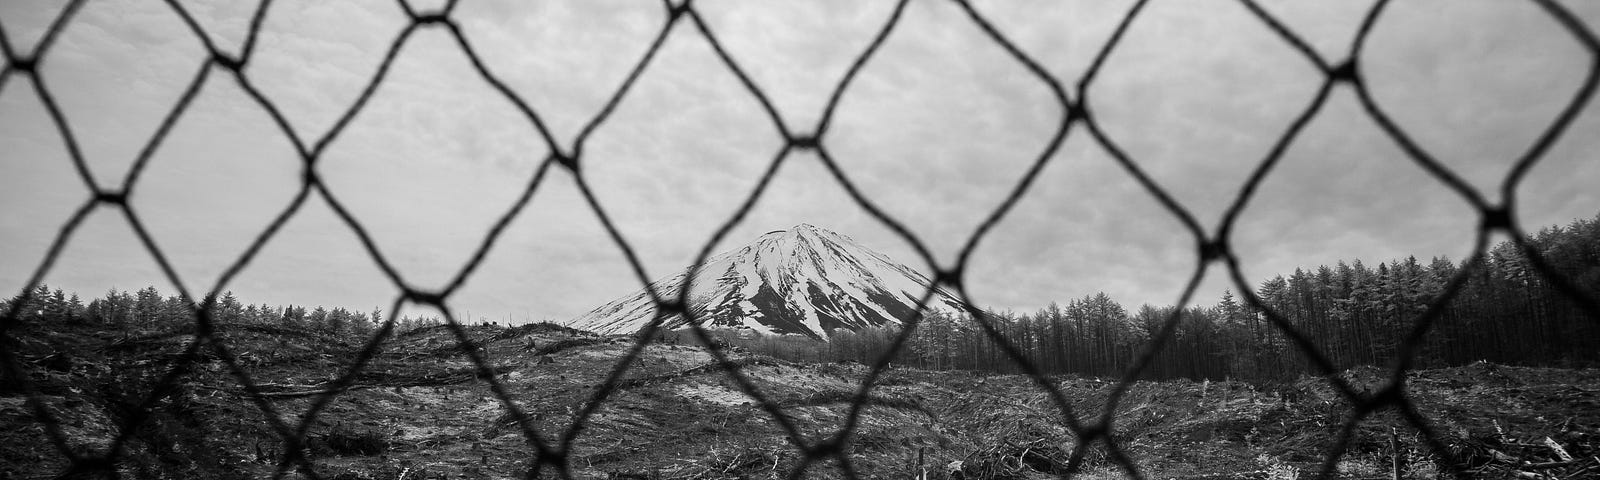 Snow capped Mt. Fuji in the distance behind a chain link fence.